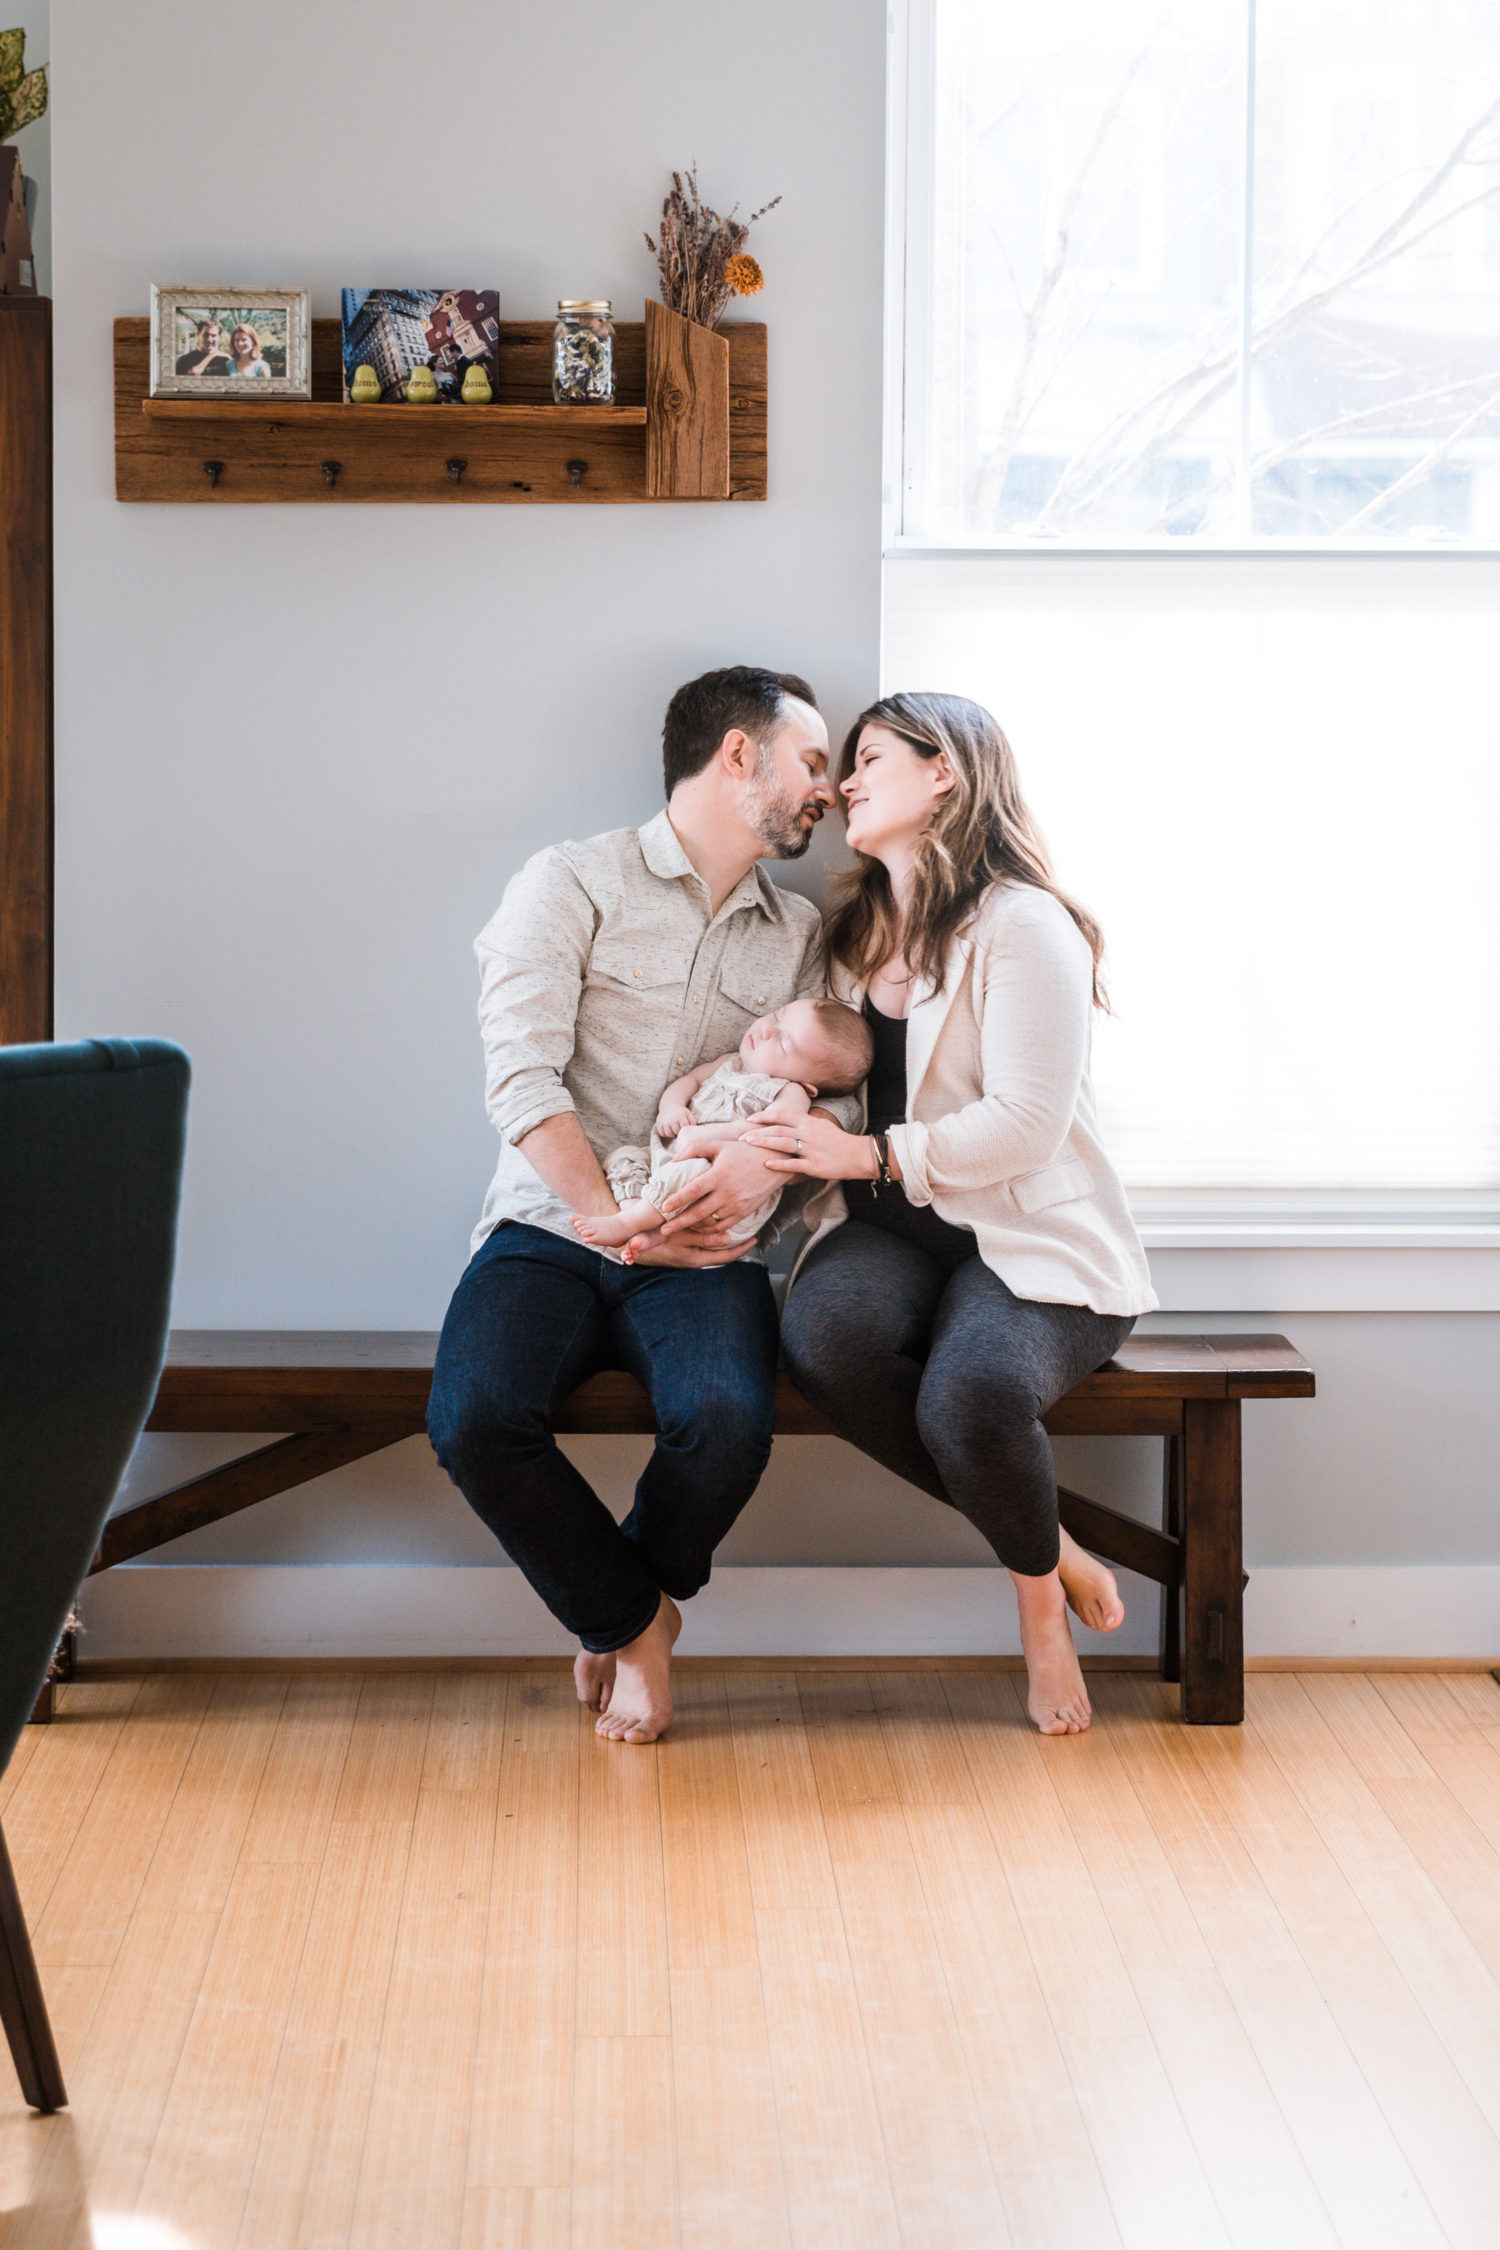 A 6 Step Guide On Preparing For Your Newborn Photoshoot